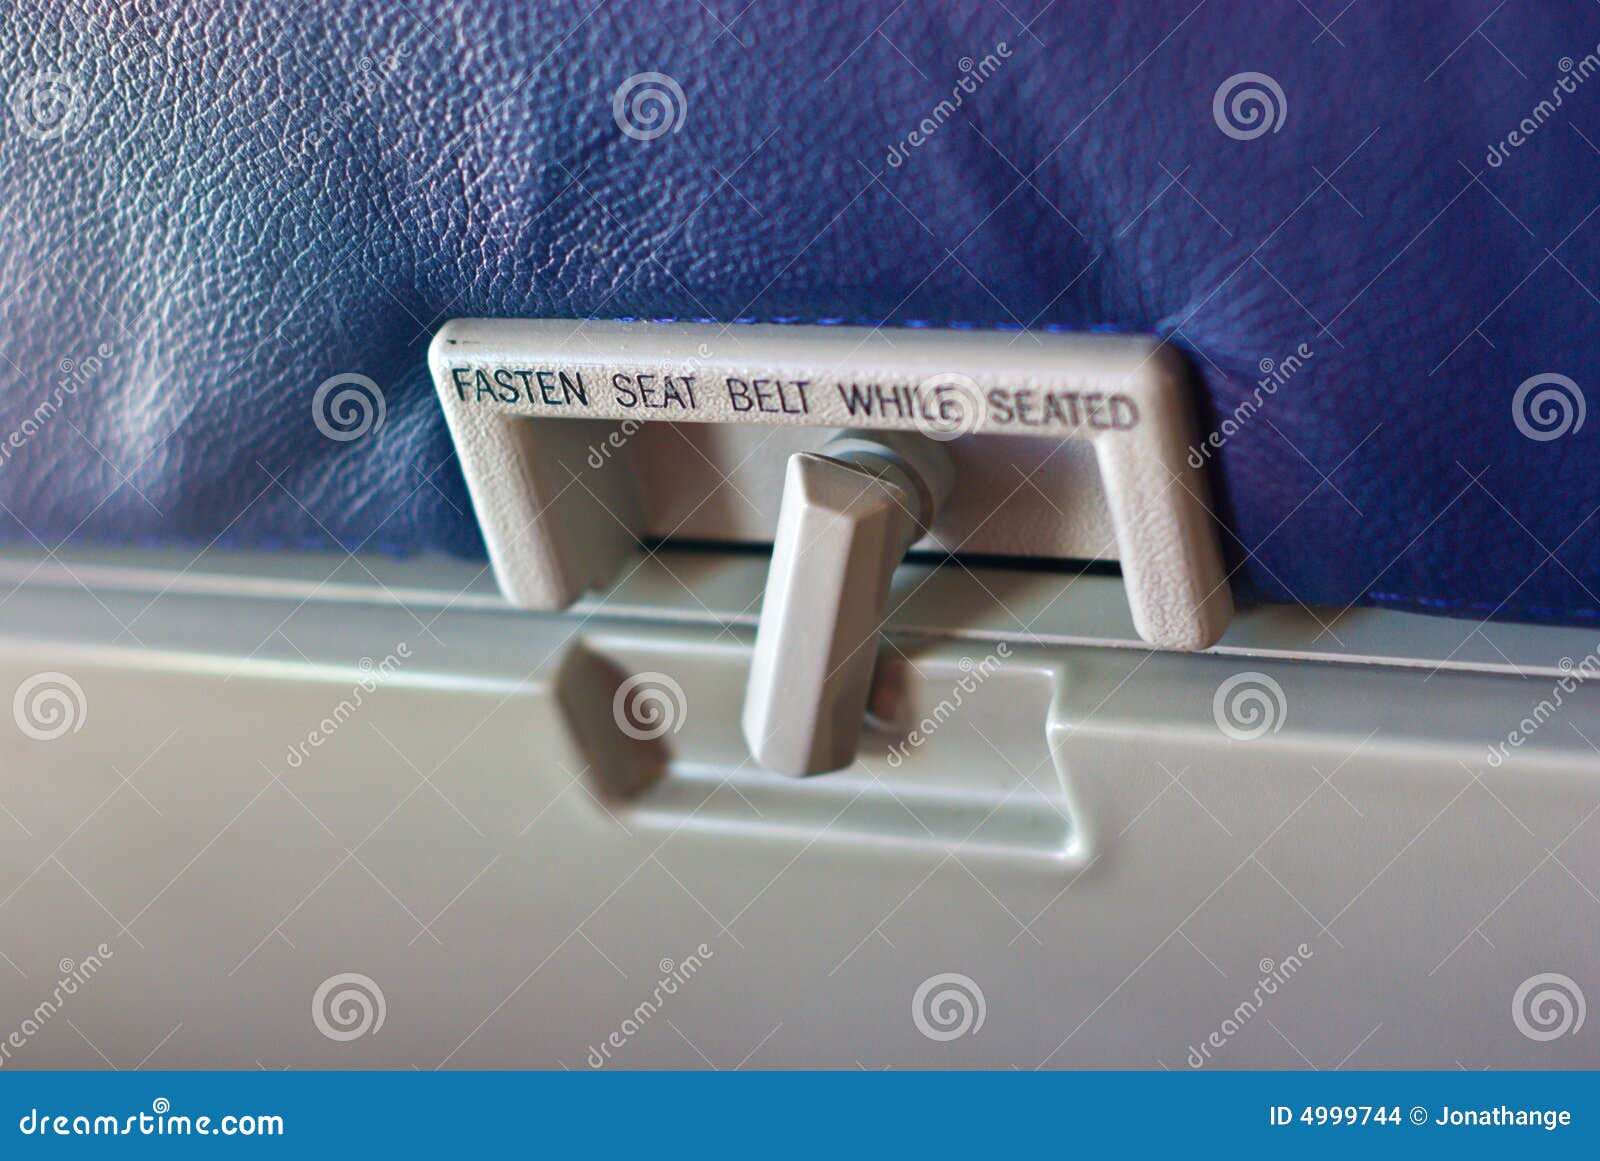 Water Bottle On Tray Airplane Interior Stock Photo 1336212170